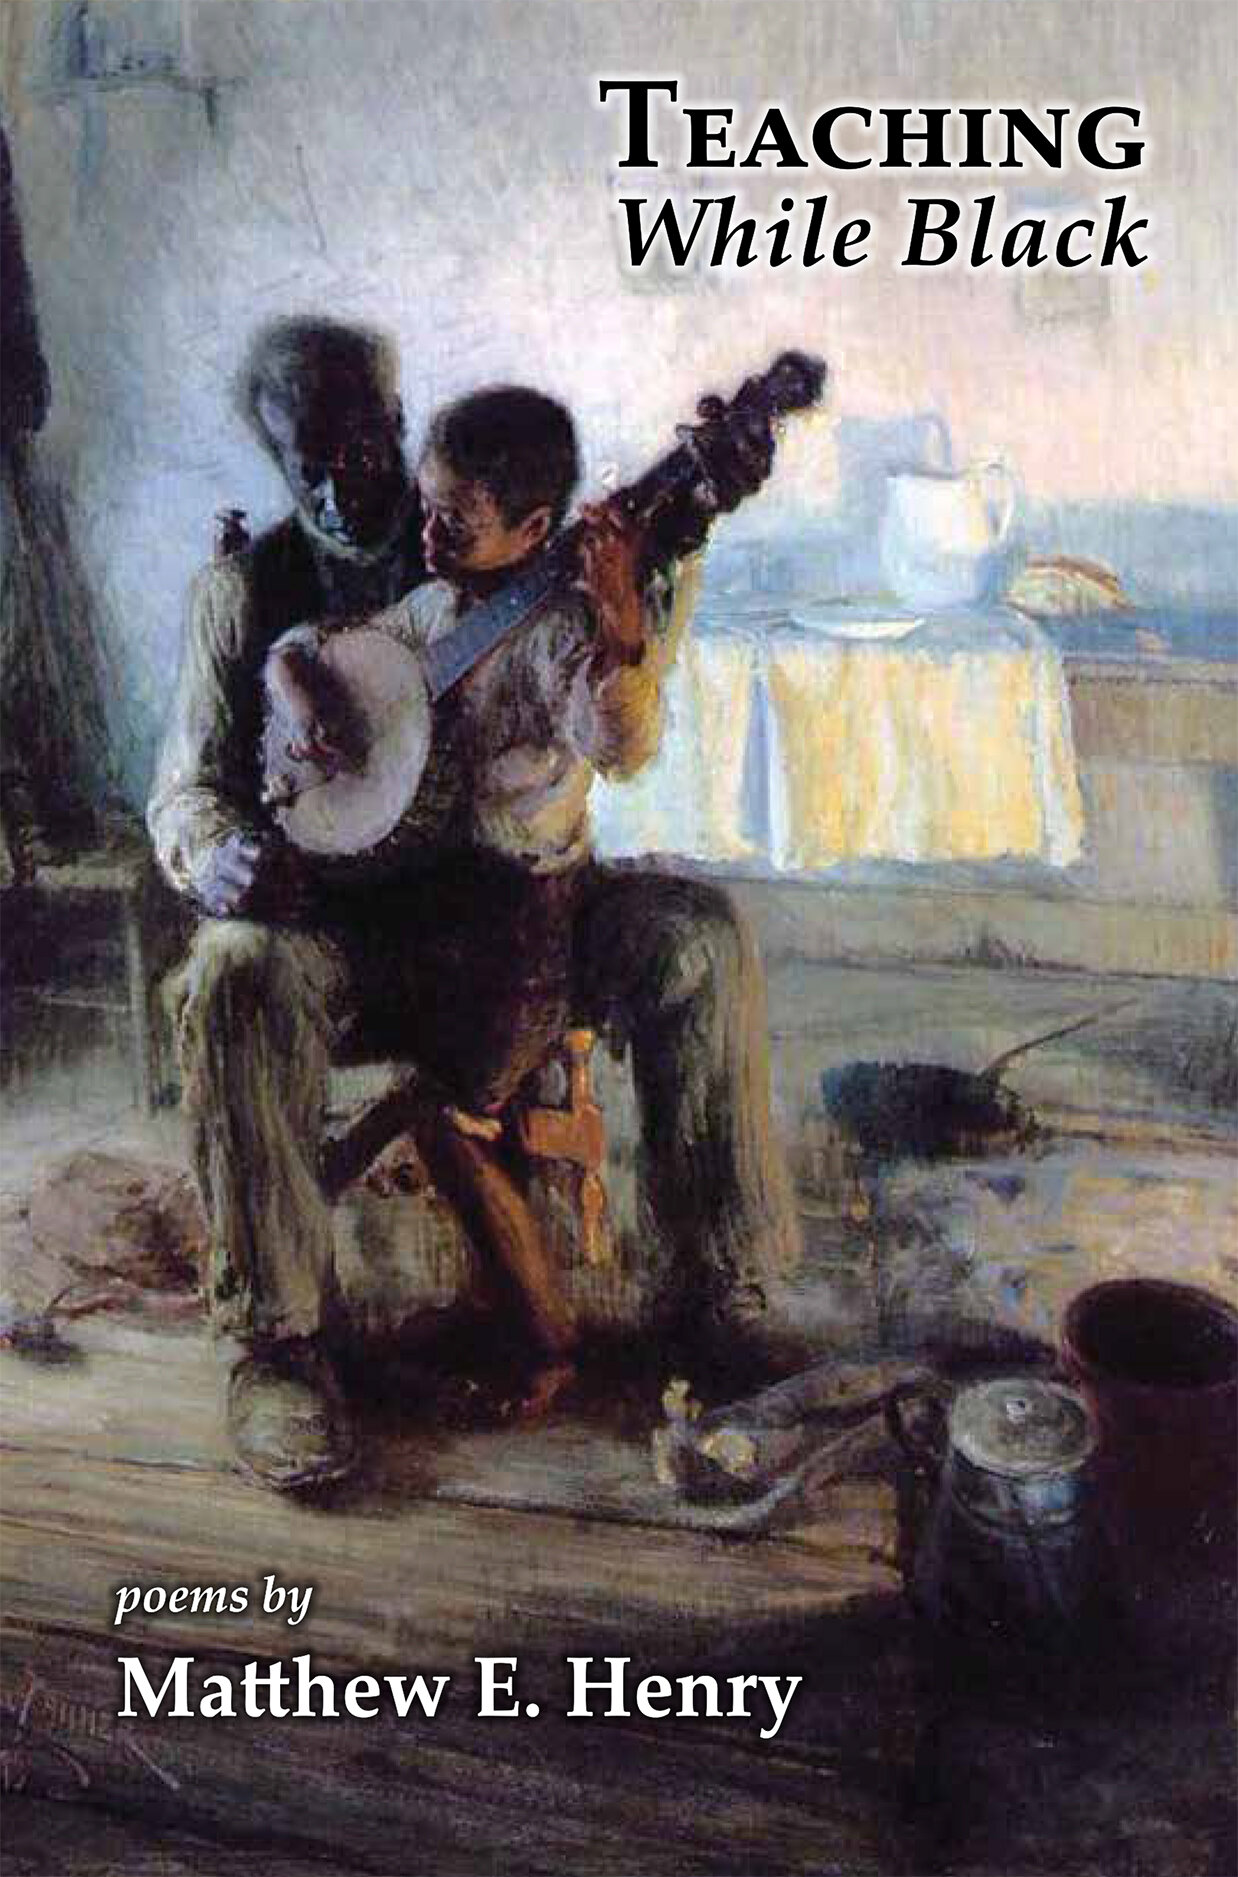 Book Cover: Teaching While Black with painting of a Black boy sitting on a Black man's lap, playing the banjo.